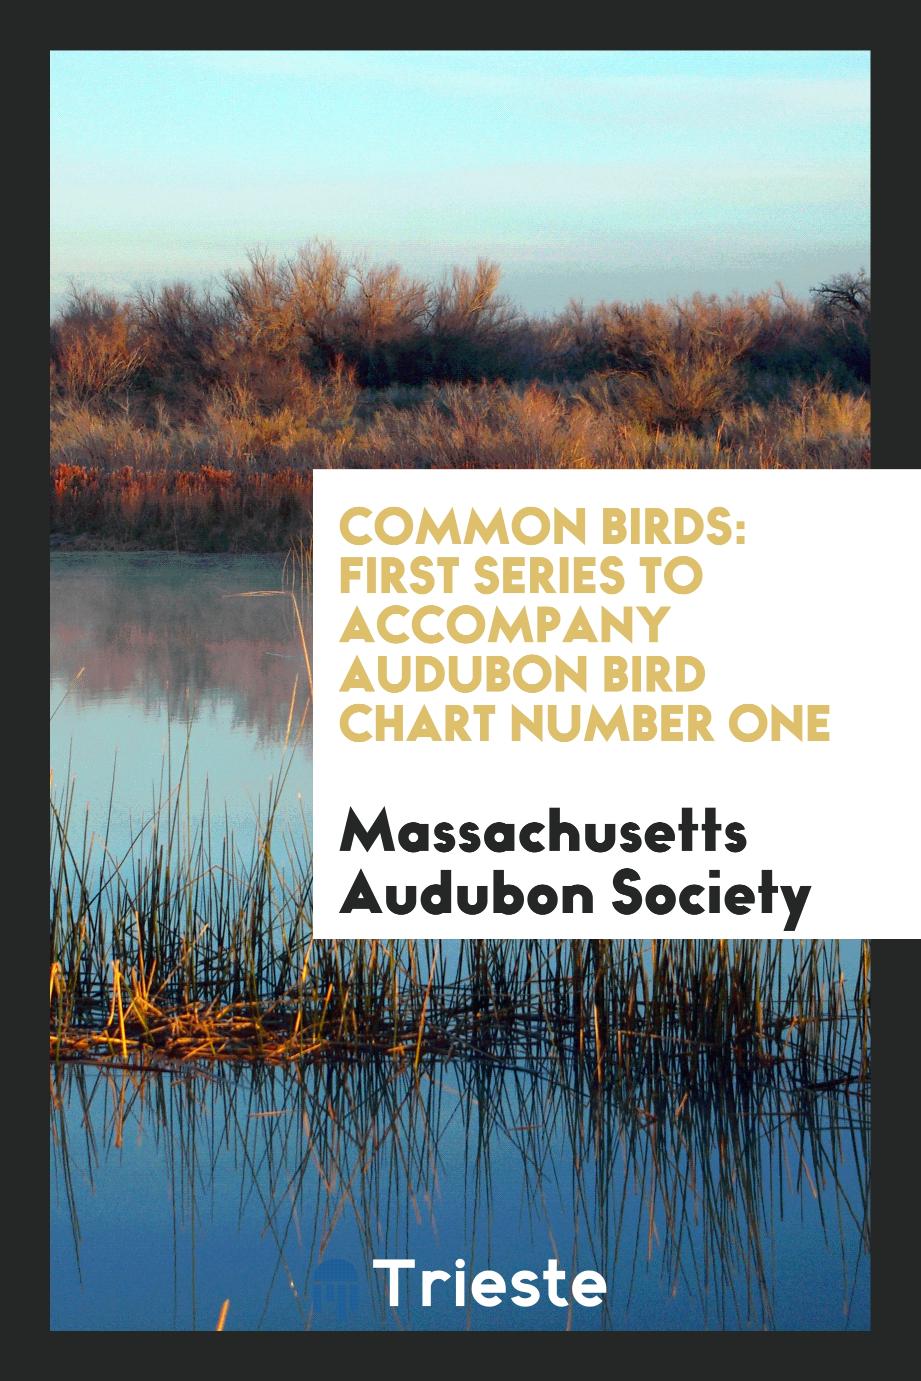 Common birds: First series to accompany Audubon Bird Chart number one